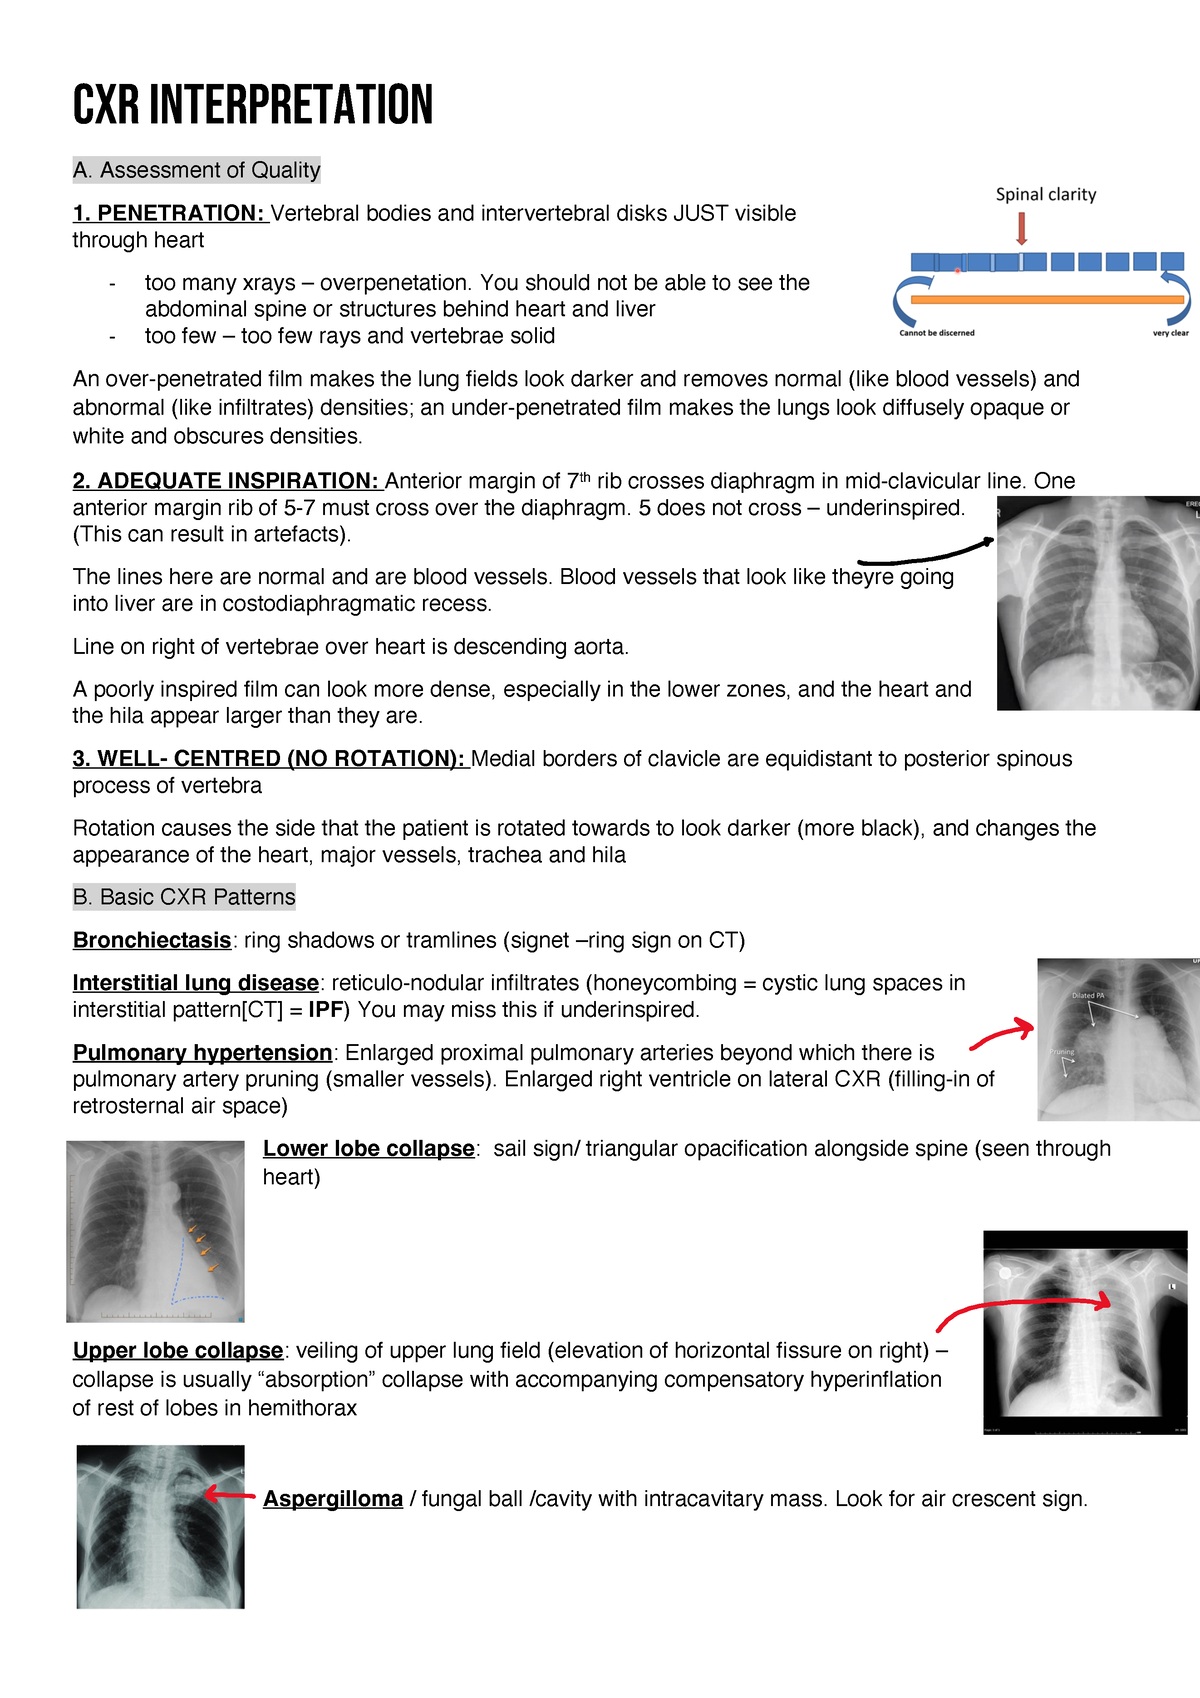 Chest imaging using signs, symbols, and naturalistic images: a practical  guide for radiologists and non-radiologists | Insights into Imaging | Full  Text